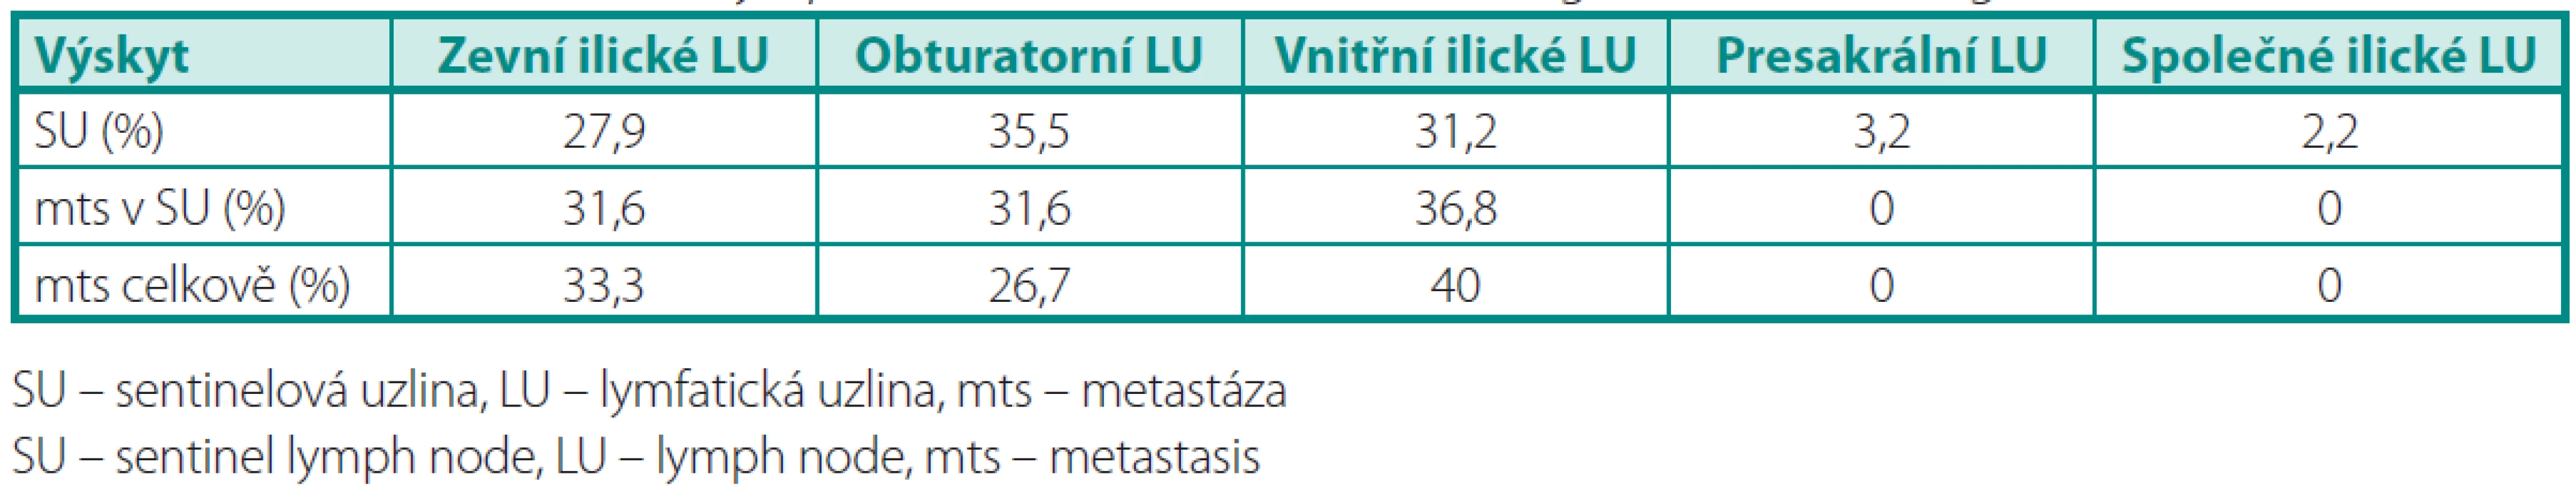 Výskyt SU a metastáz podle anatomických regionů
Table 3. Occurrence of sentinel lymph node and metastases according to anatomical regions